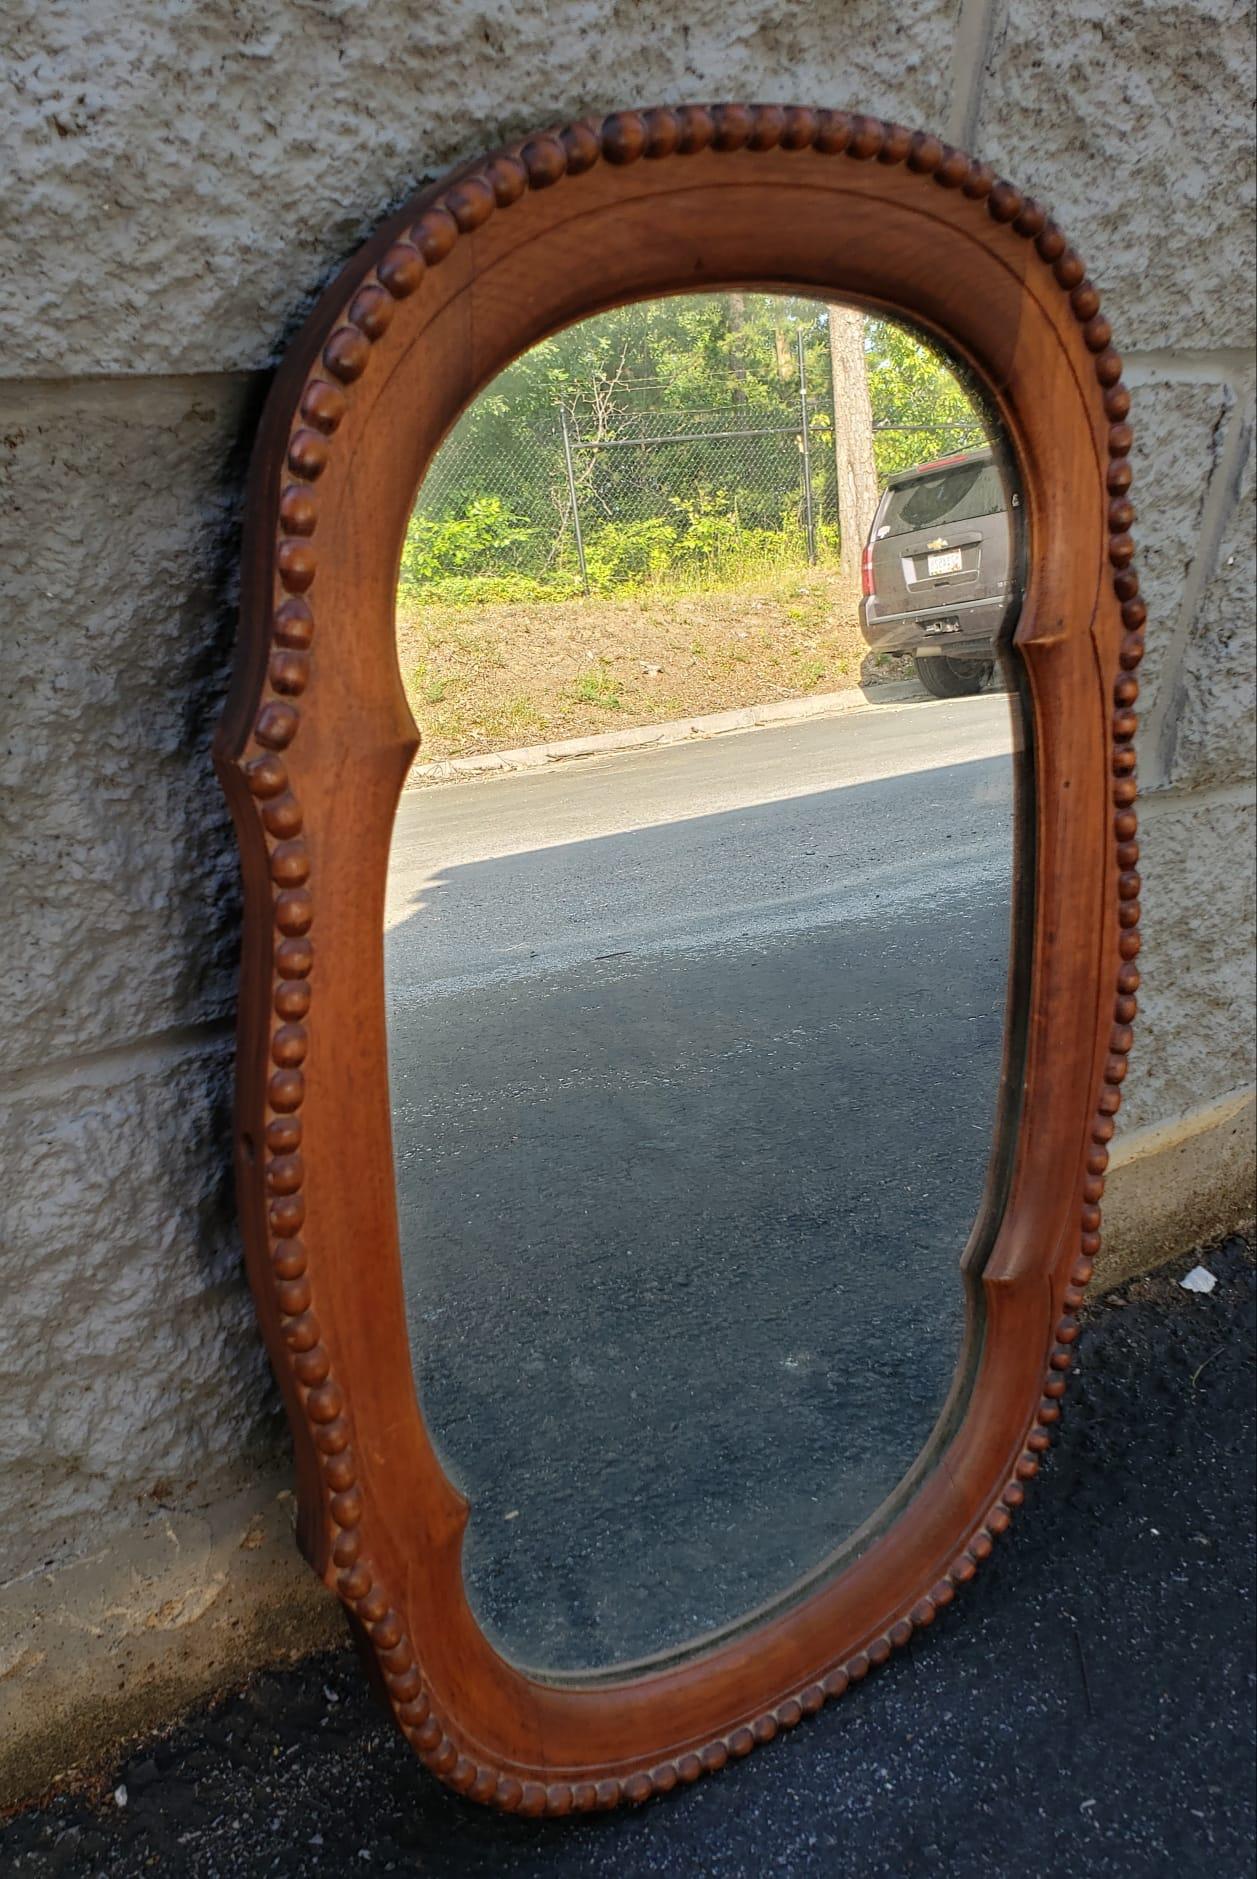 An Early 20th Century Edwardian Hand - Carved Solid Mahogany Dressing Mirror in great shape for its age.
Measures 15.5